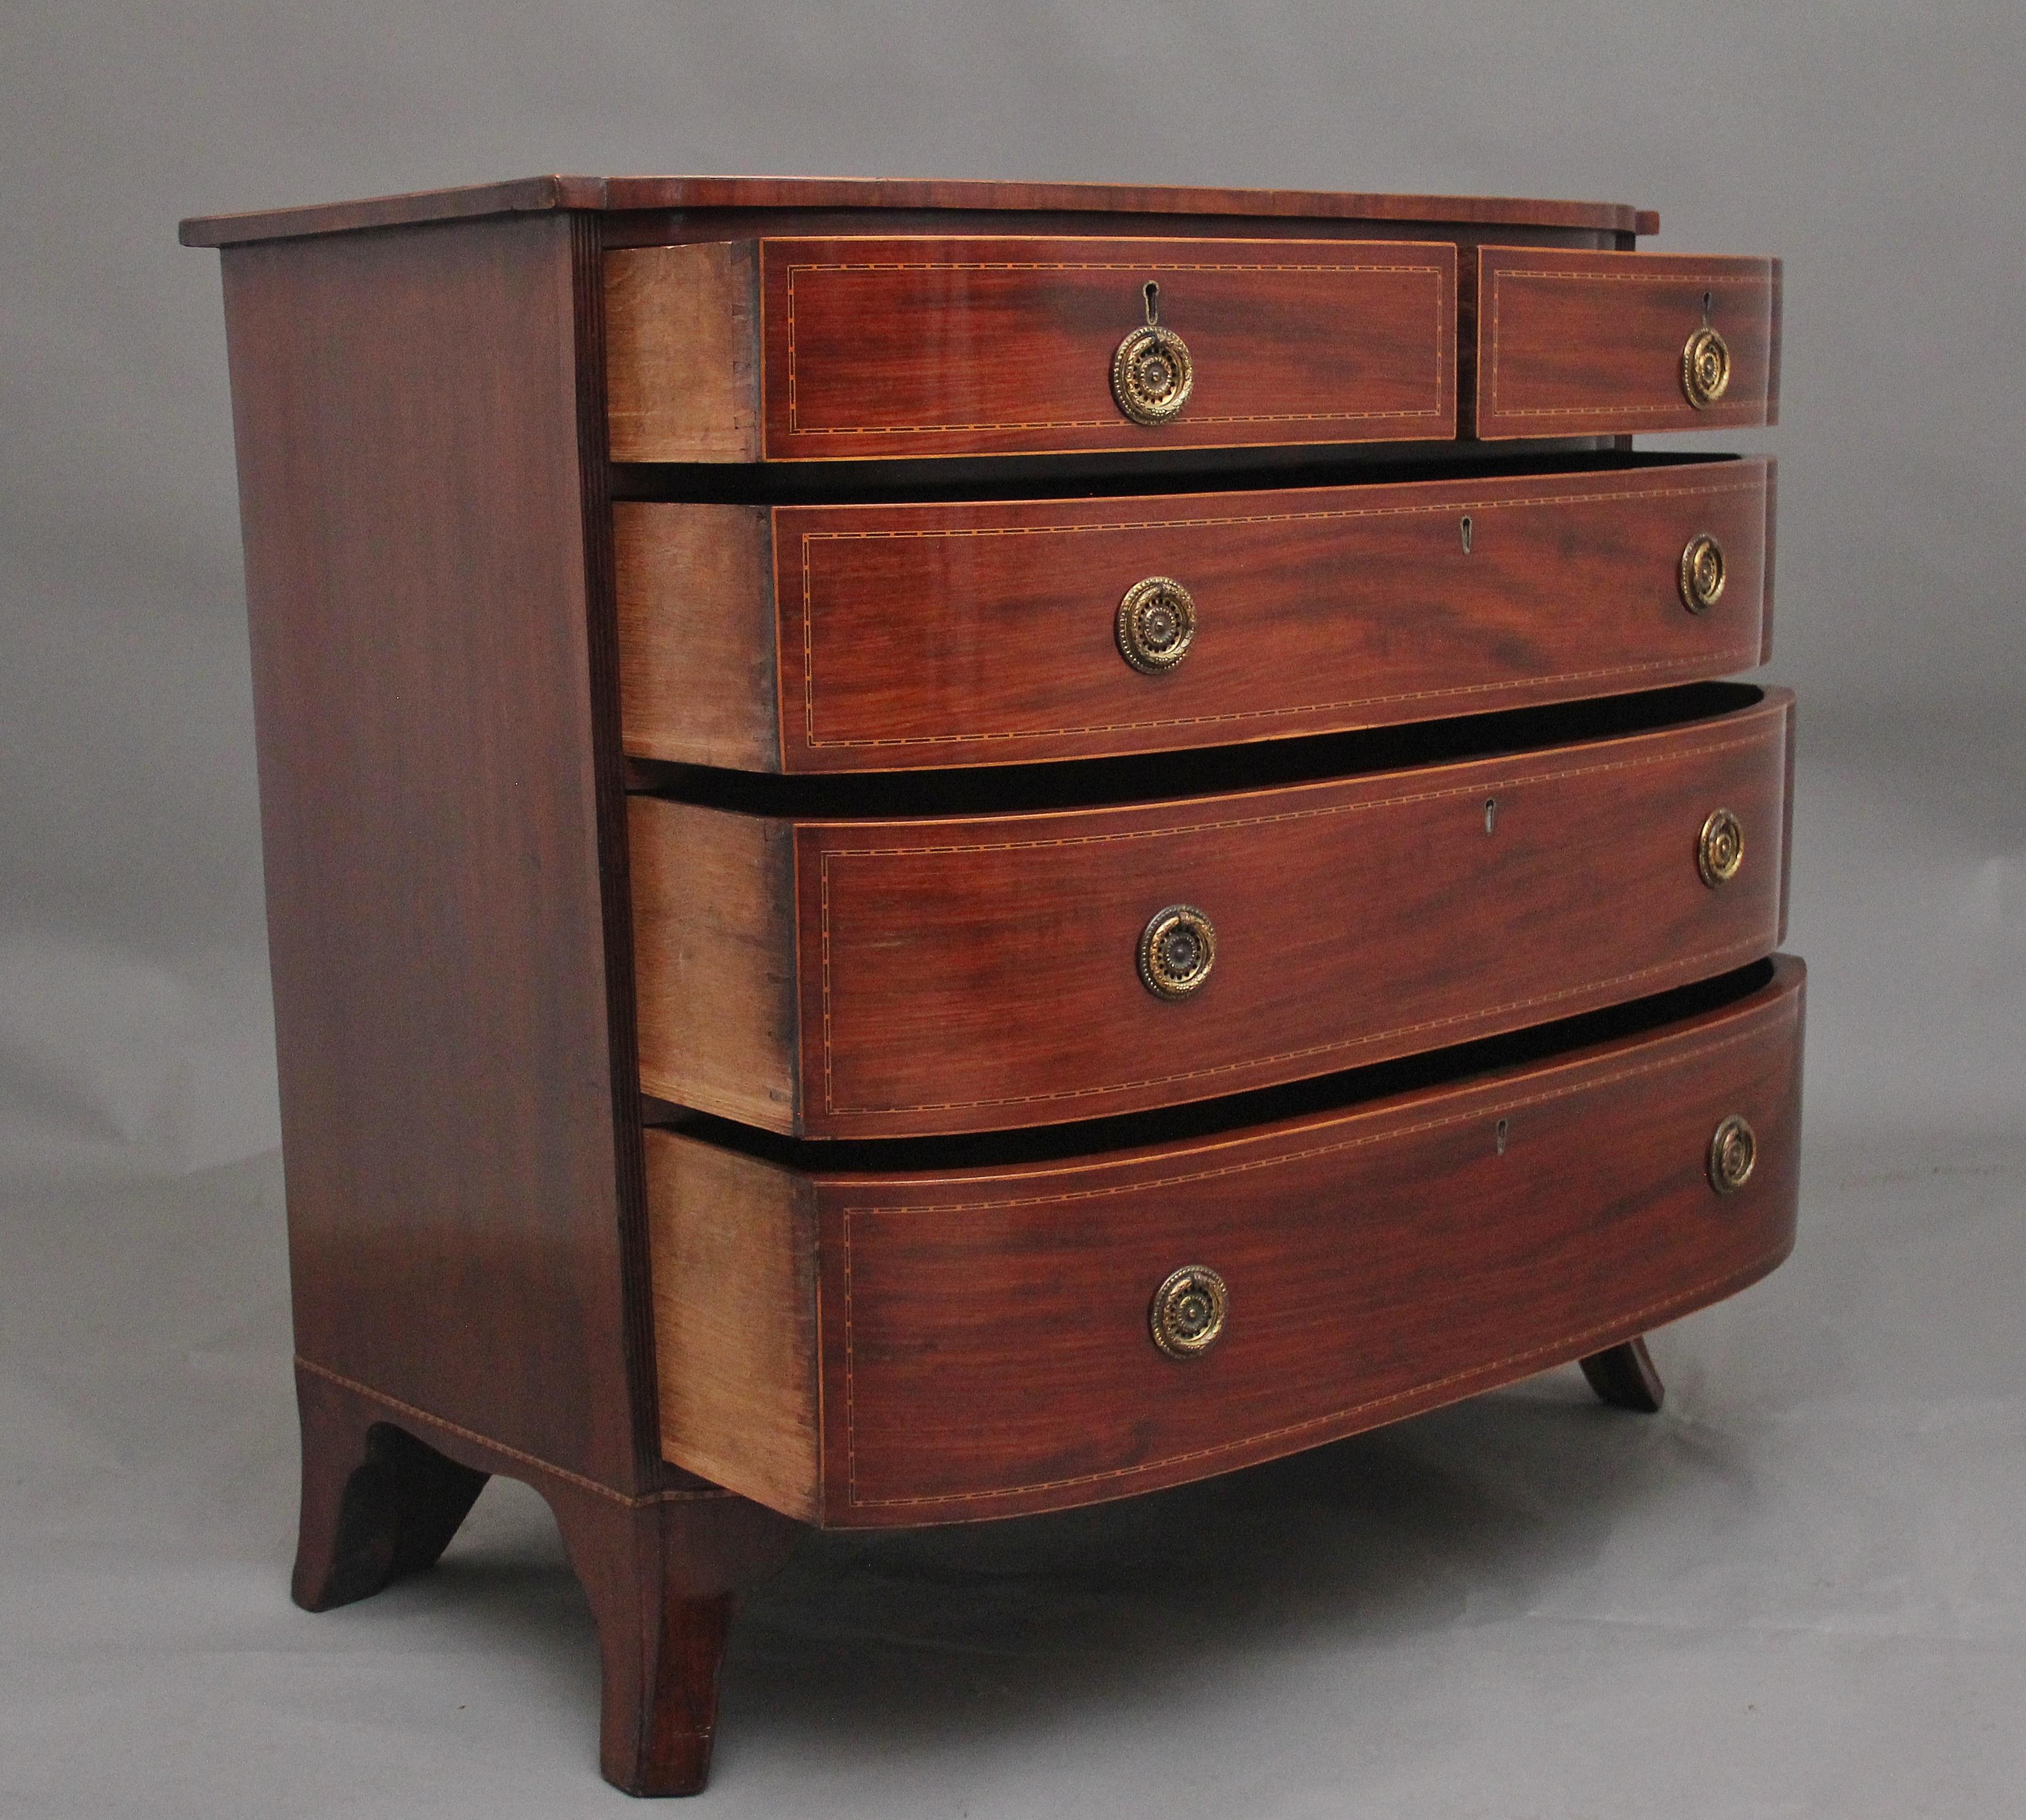 Regency 19th Century inlaid mahogany bowfront chest of drawers